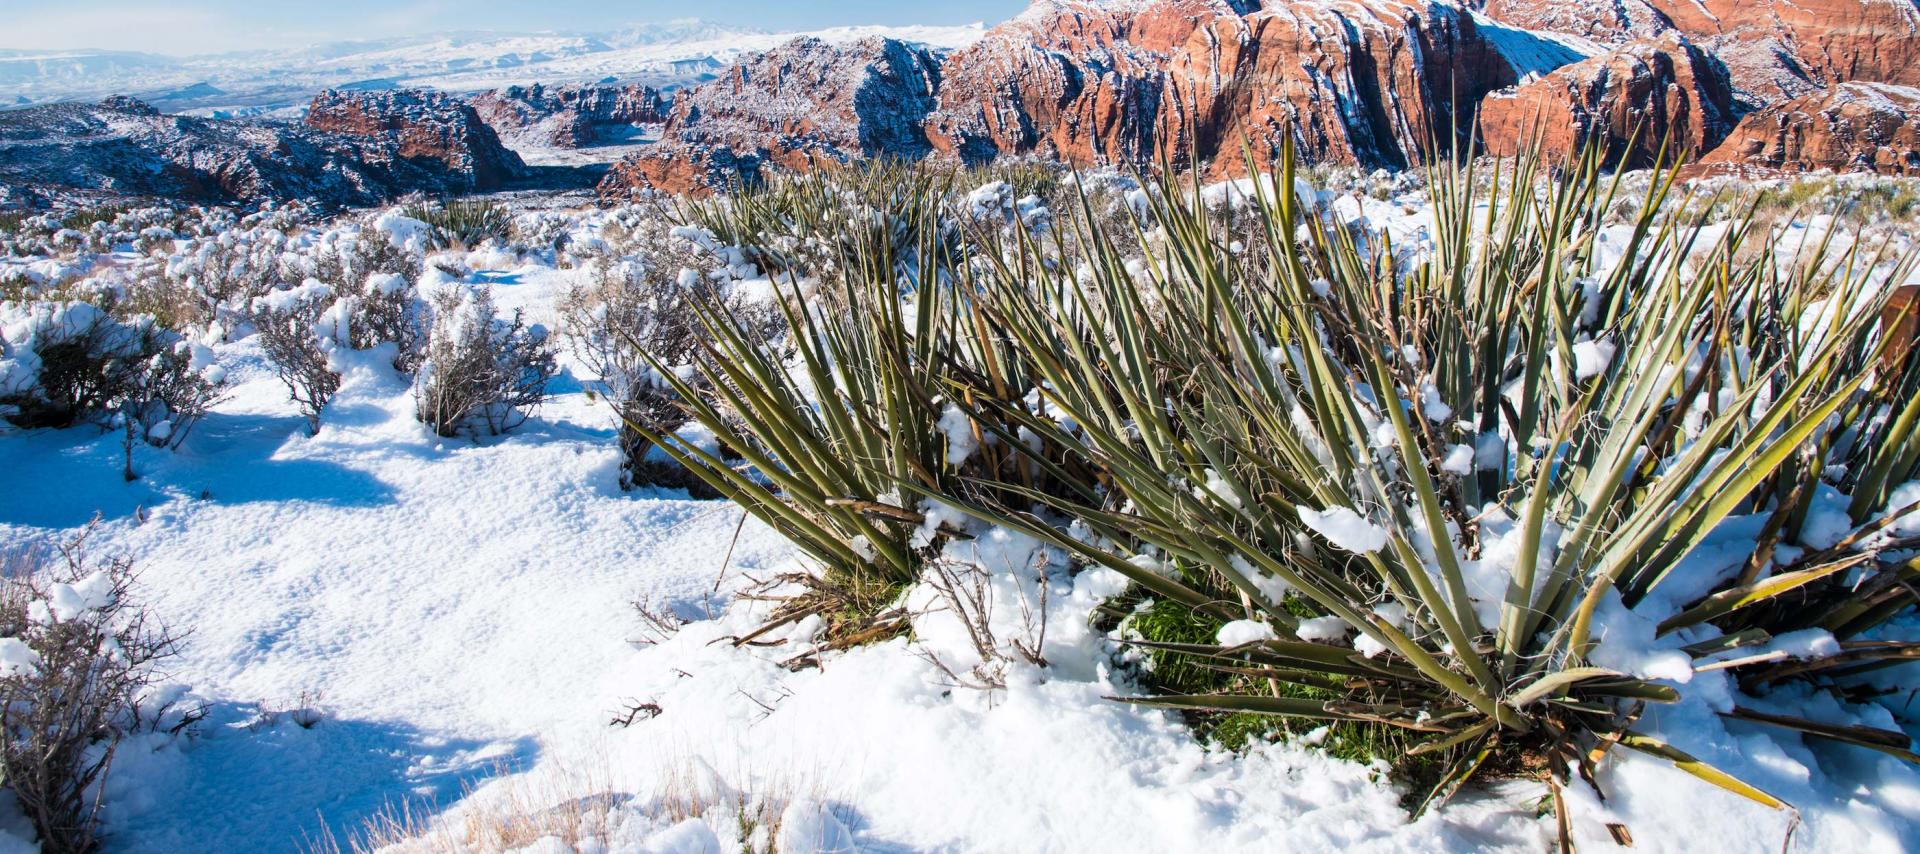 Snow covering the ground in Snow Canyon State Park in Utah